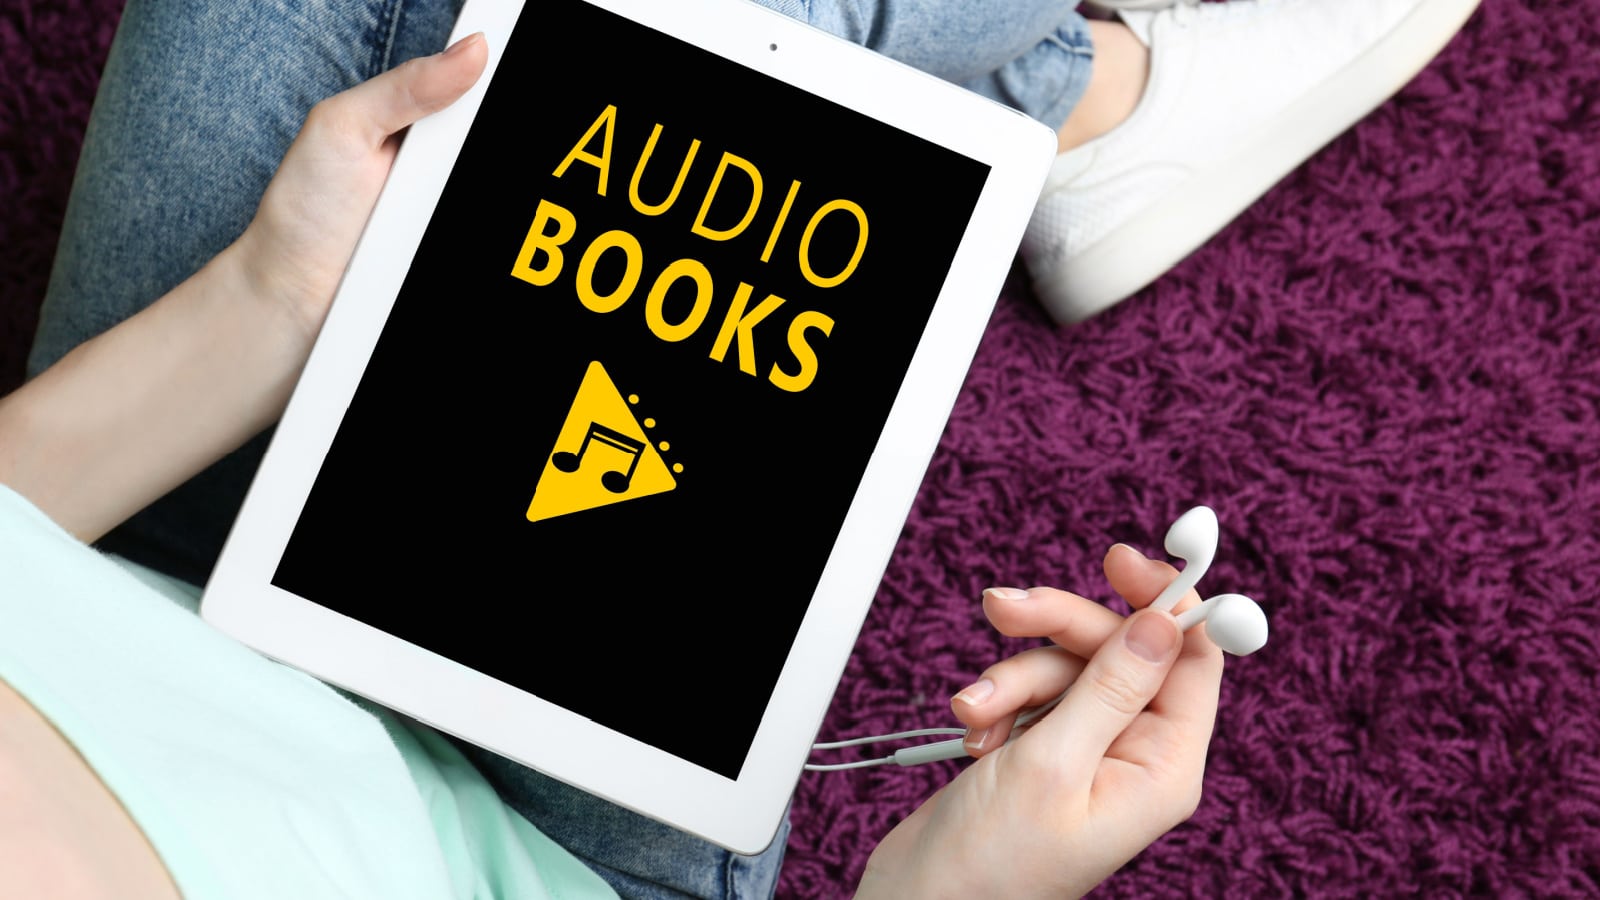 Concept of audio books and modern technology. Woman using tablet and earphones, closeup